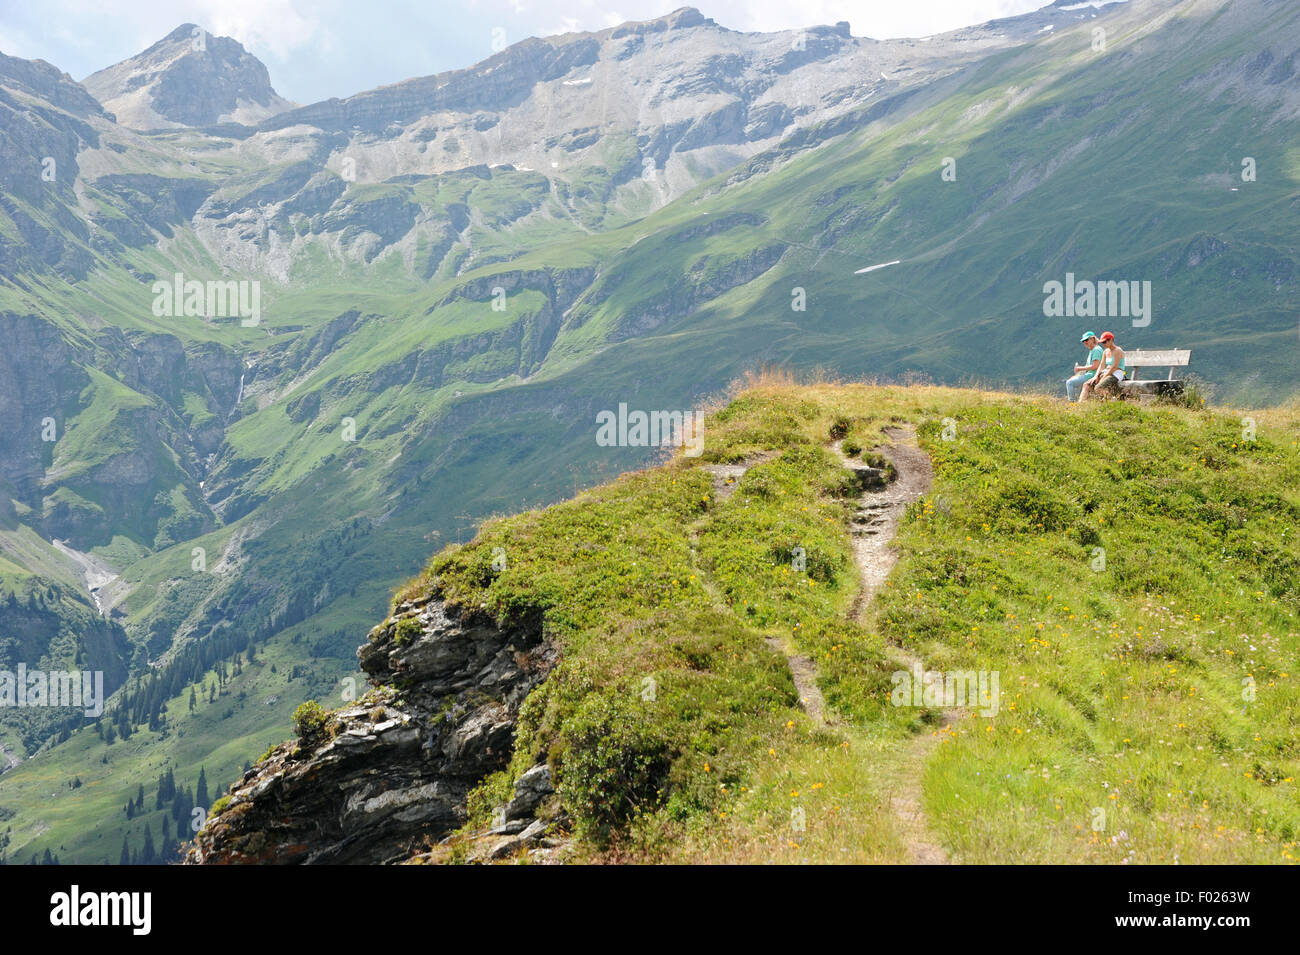 Hiker on the Glaser Grat  in the swiss alps canton Graubuenden. Stock Photo